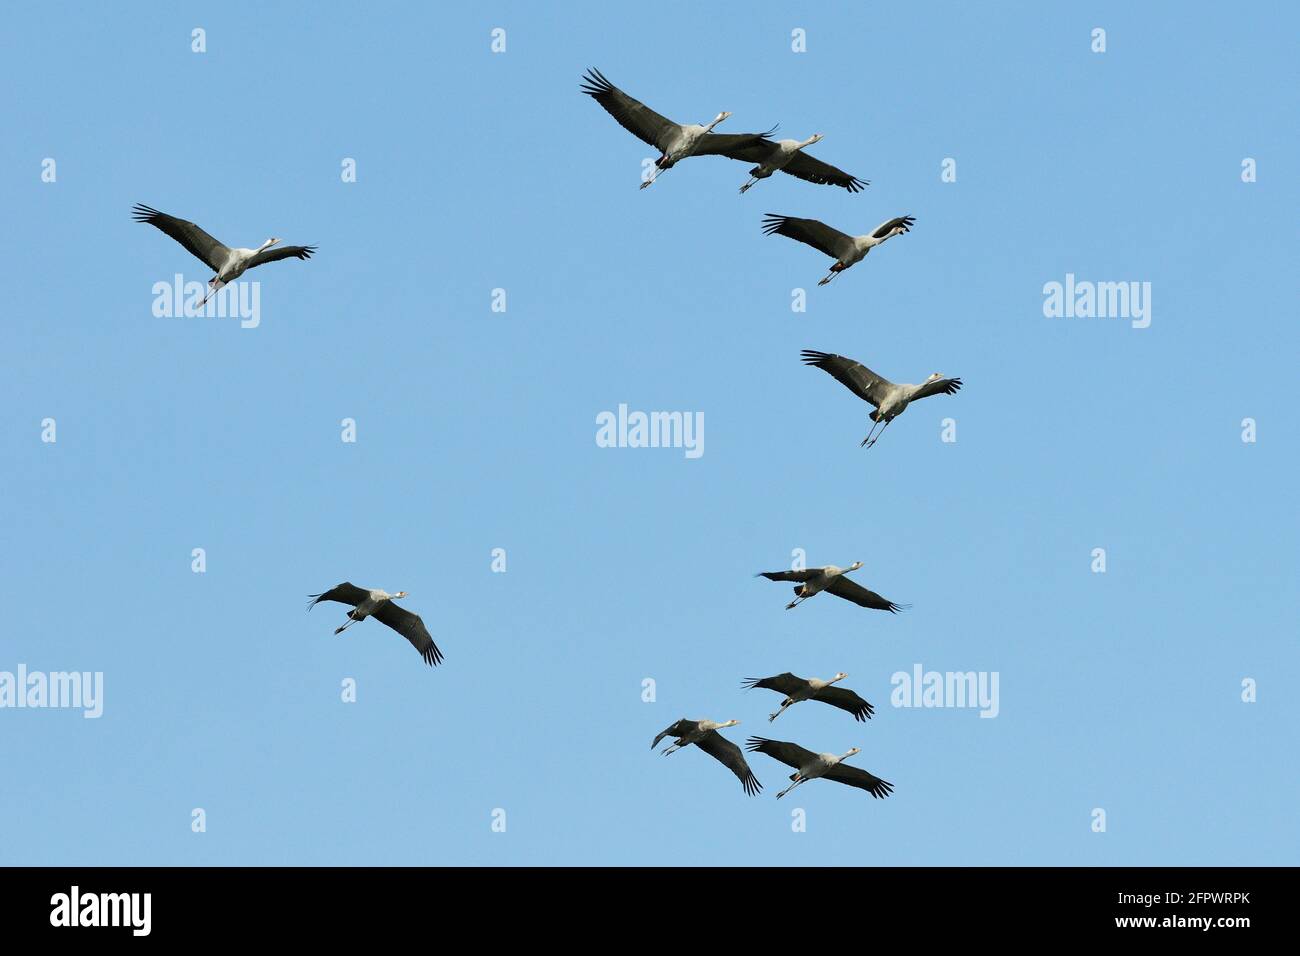 Flock of Common / Eurasian cranes (Grus grus) juveniles released by the Great Crane Project, approaching in flight, Somerset Levels and Moors, UK. Stock Photo